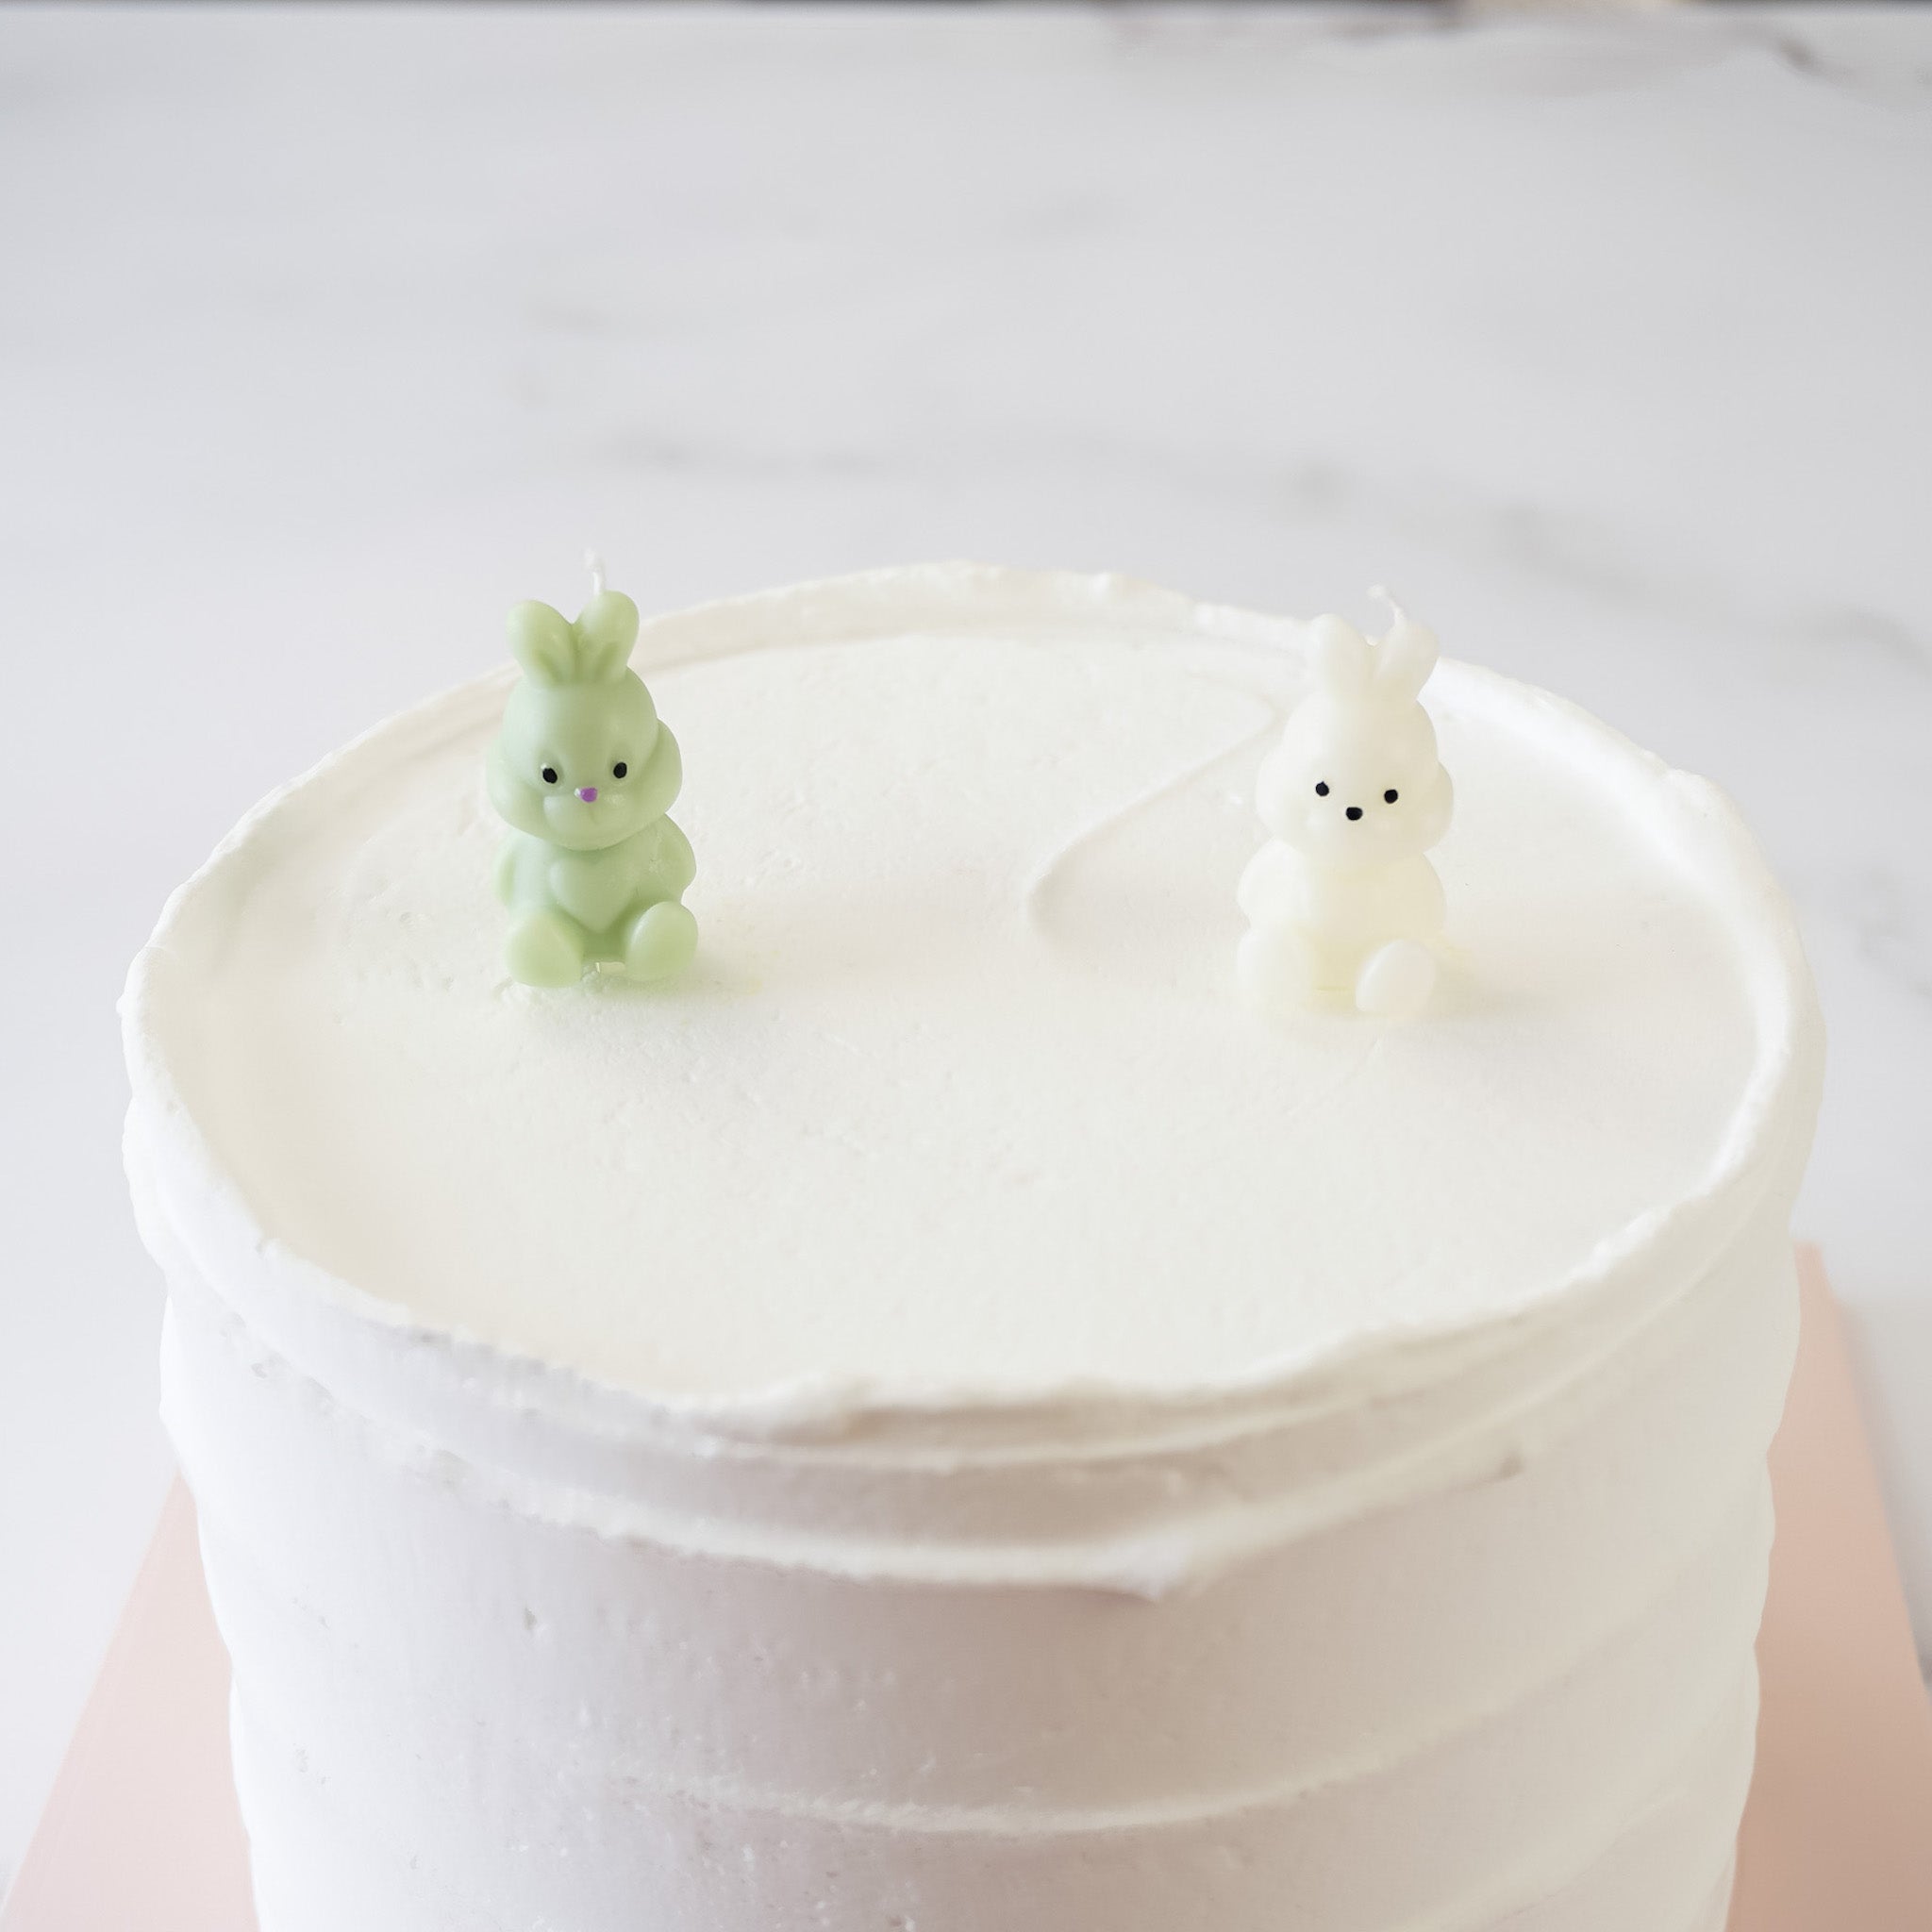 bunny party candles in white and green